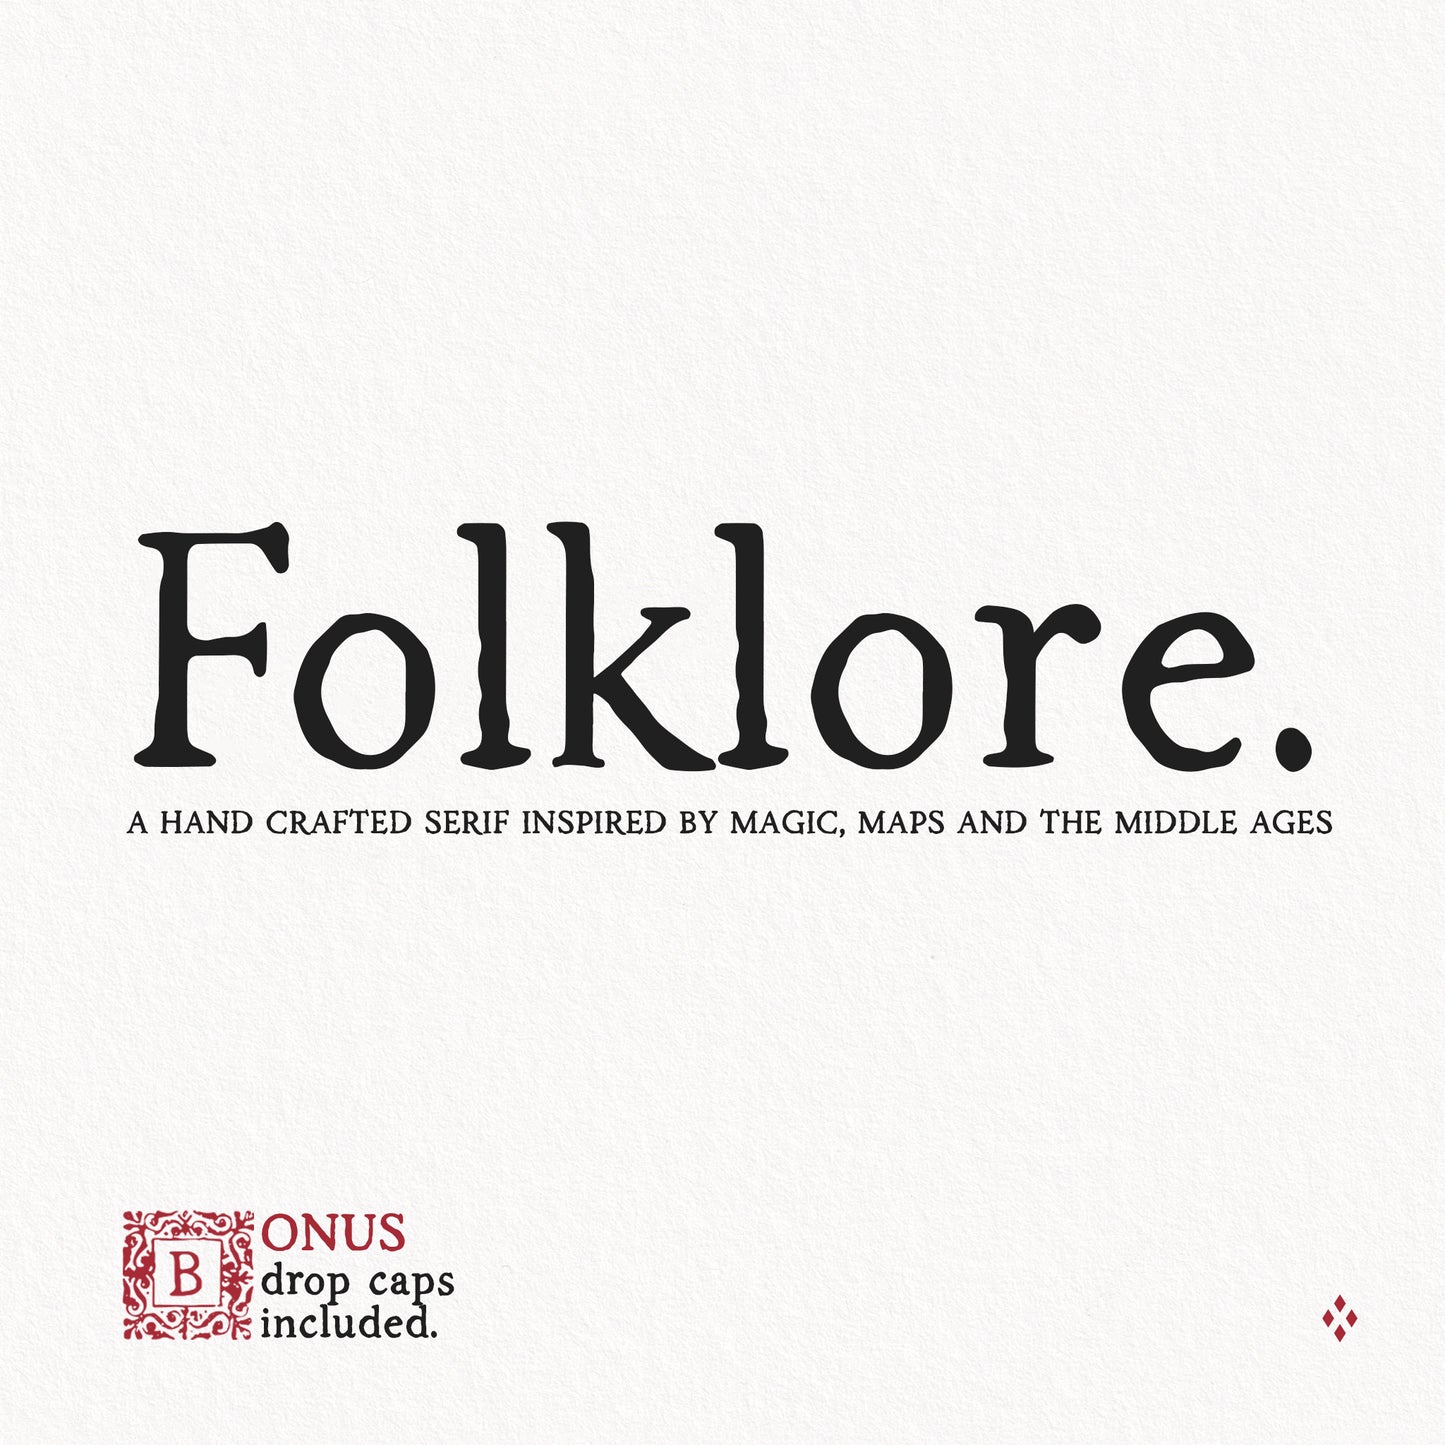 Folklore font main promotional image with the name set in black against a light paper textured background